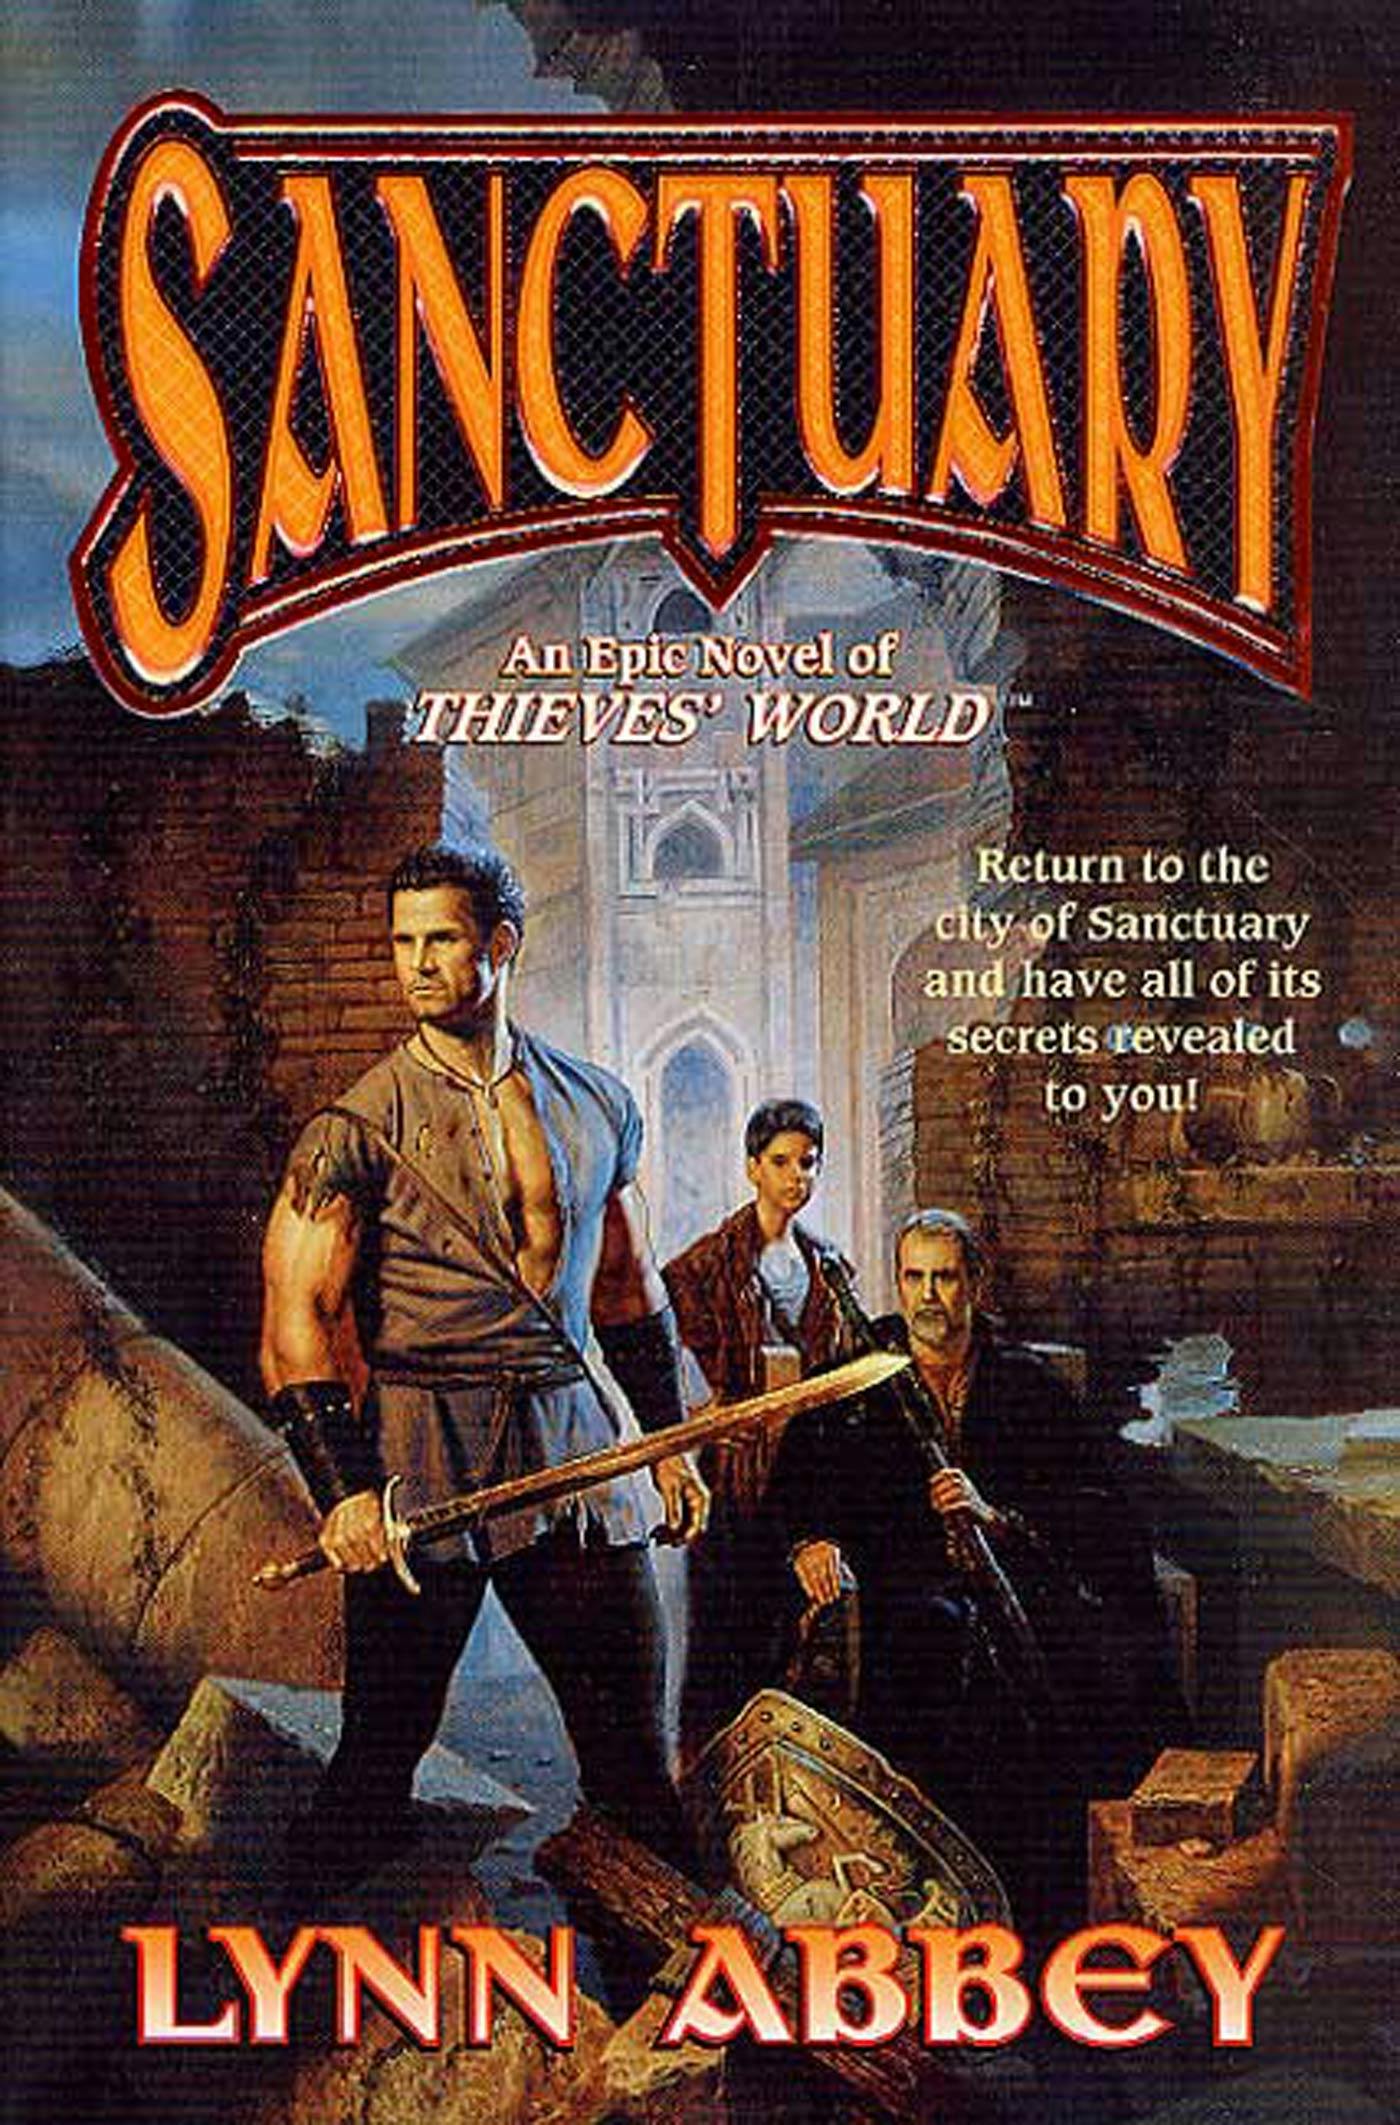 Cover for the book titled as: Sanctuary